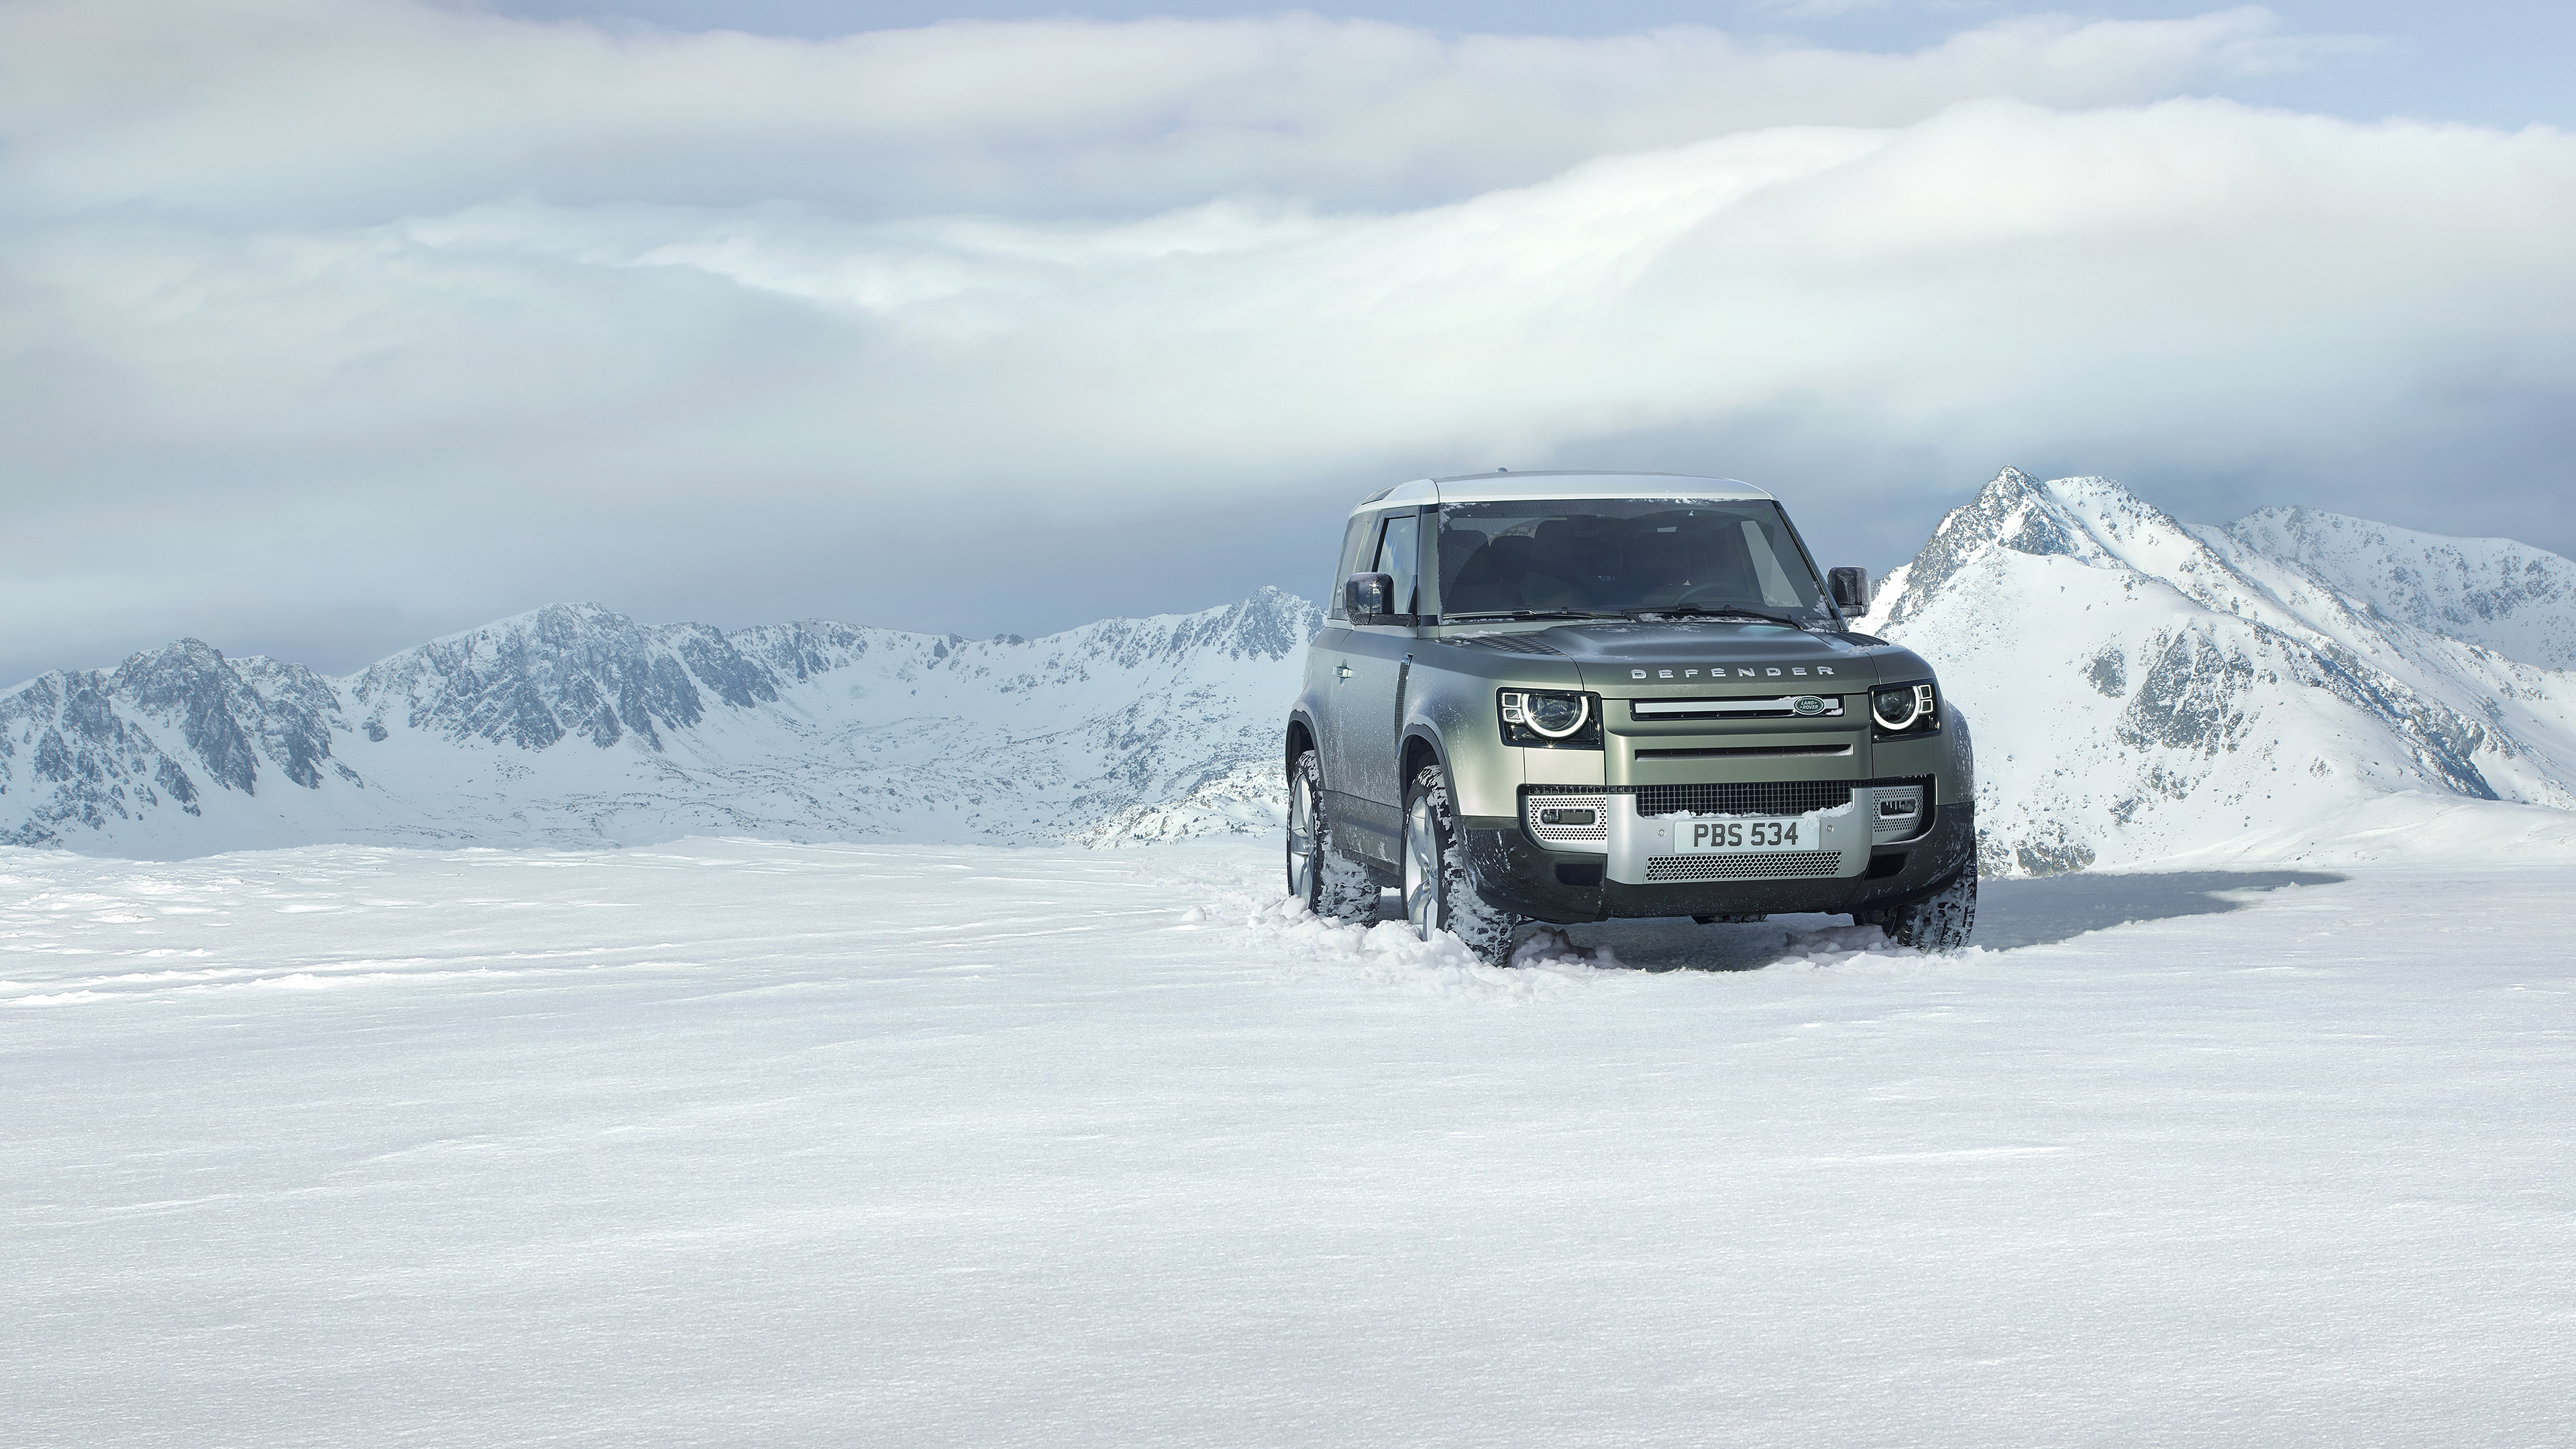 Land Rover Defender Car Vehicle SUV Off Road 4x4 Snow 3840x2160